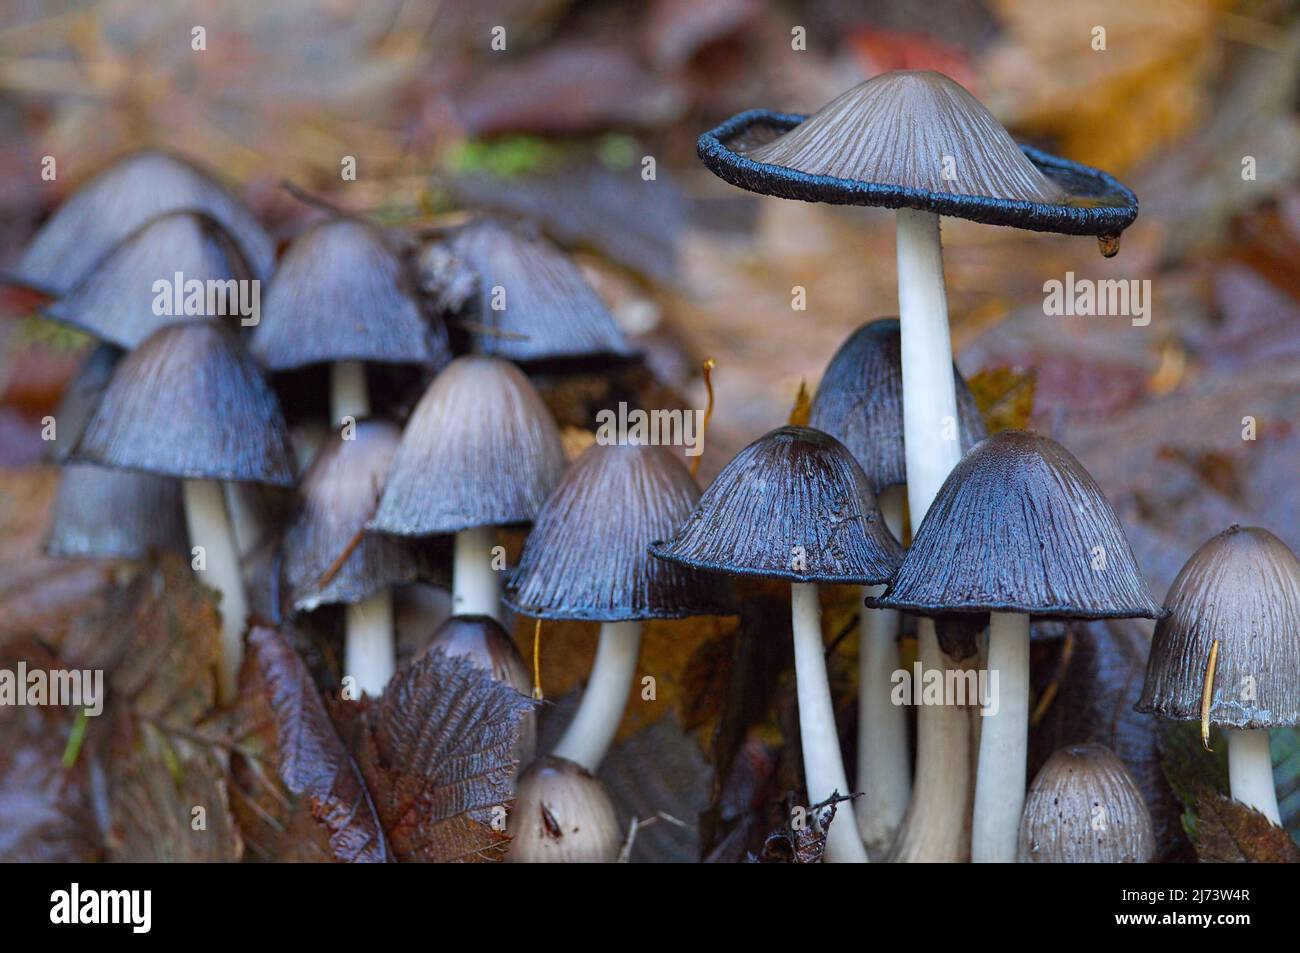 A colony of Inky Cap or Common Ink Cap mushrooms (Coprinopsis atramentaria) starting to decompose. Stock Photo